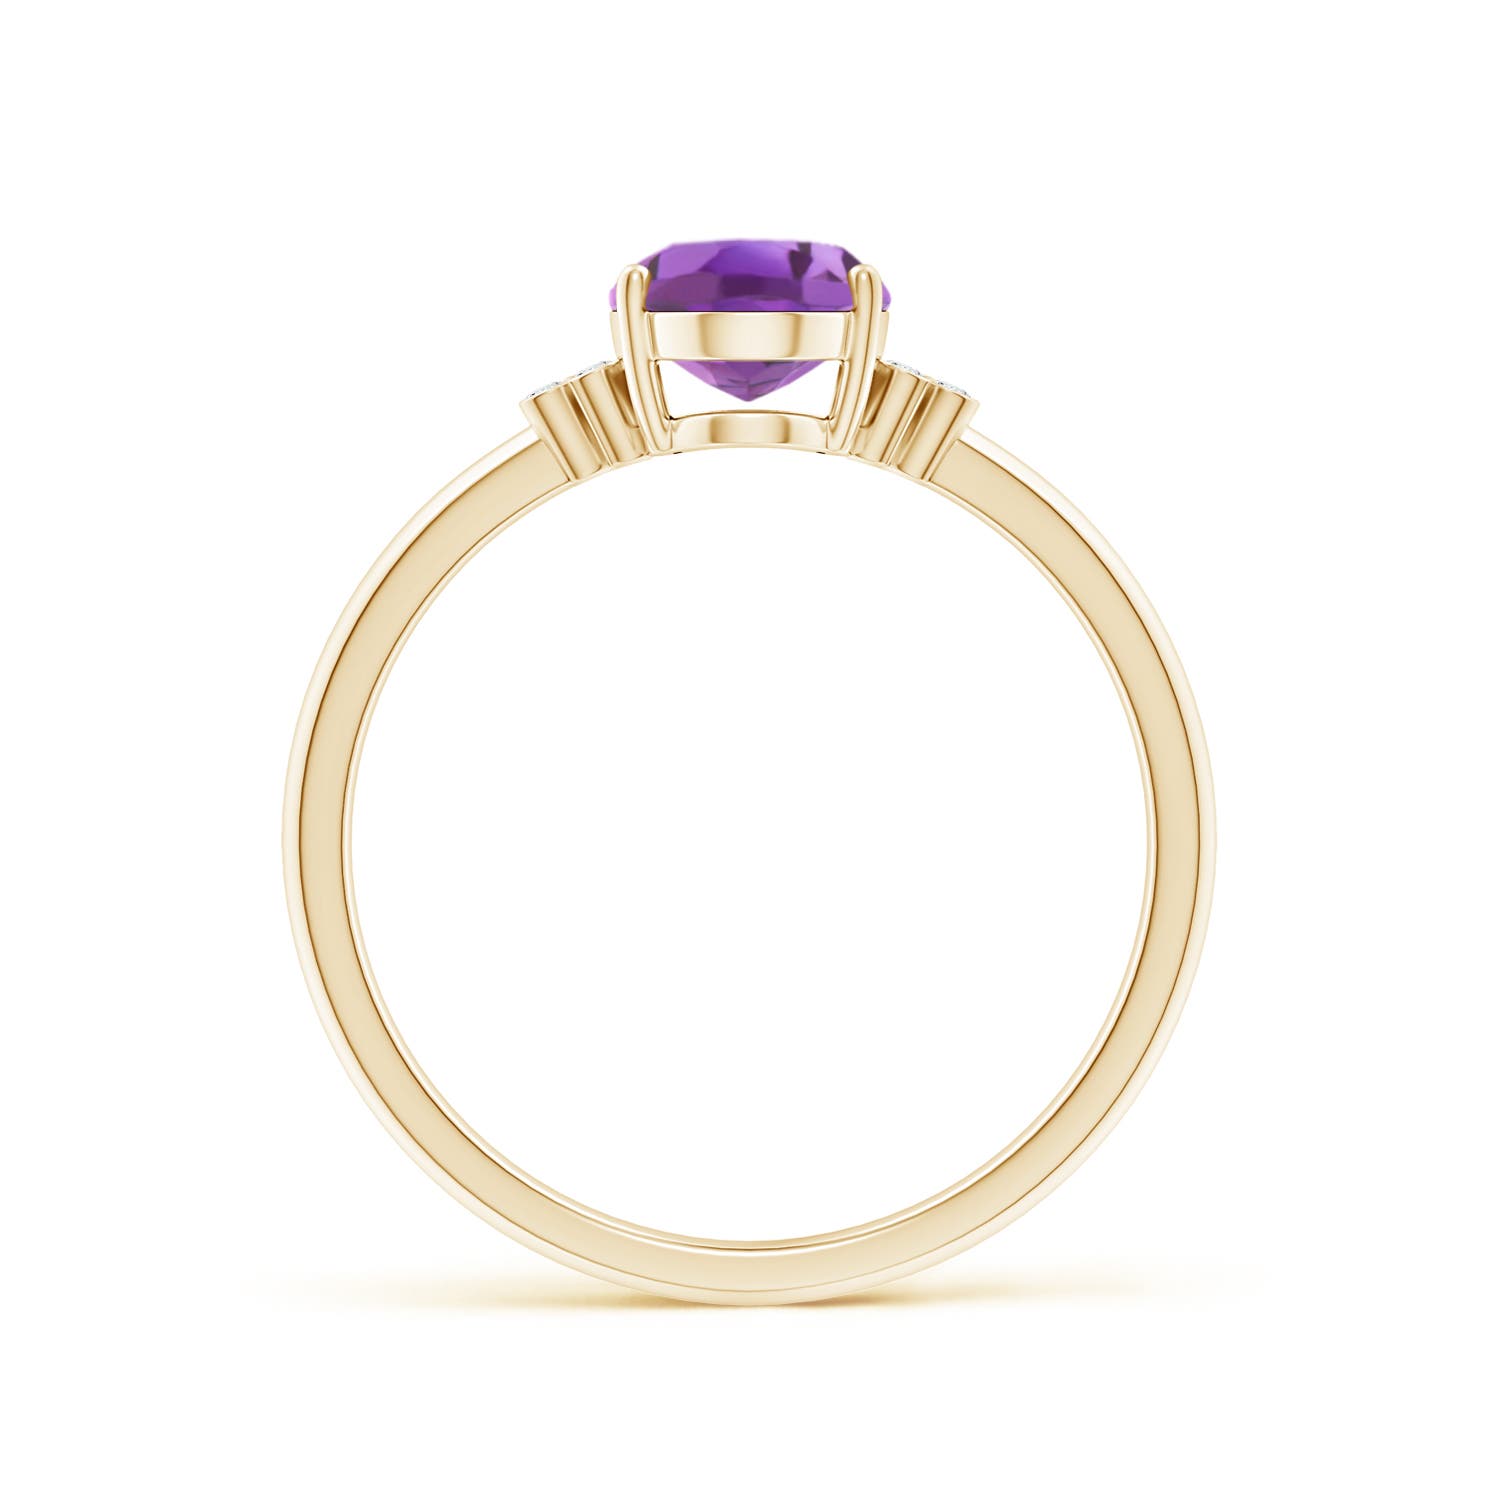 A- Amethyst / 1.2 CT / 14 KT Yellow Gold